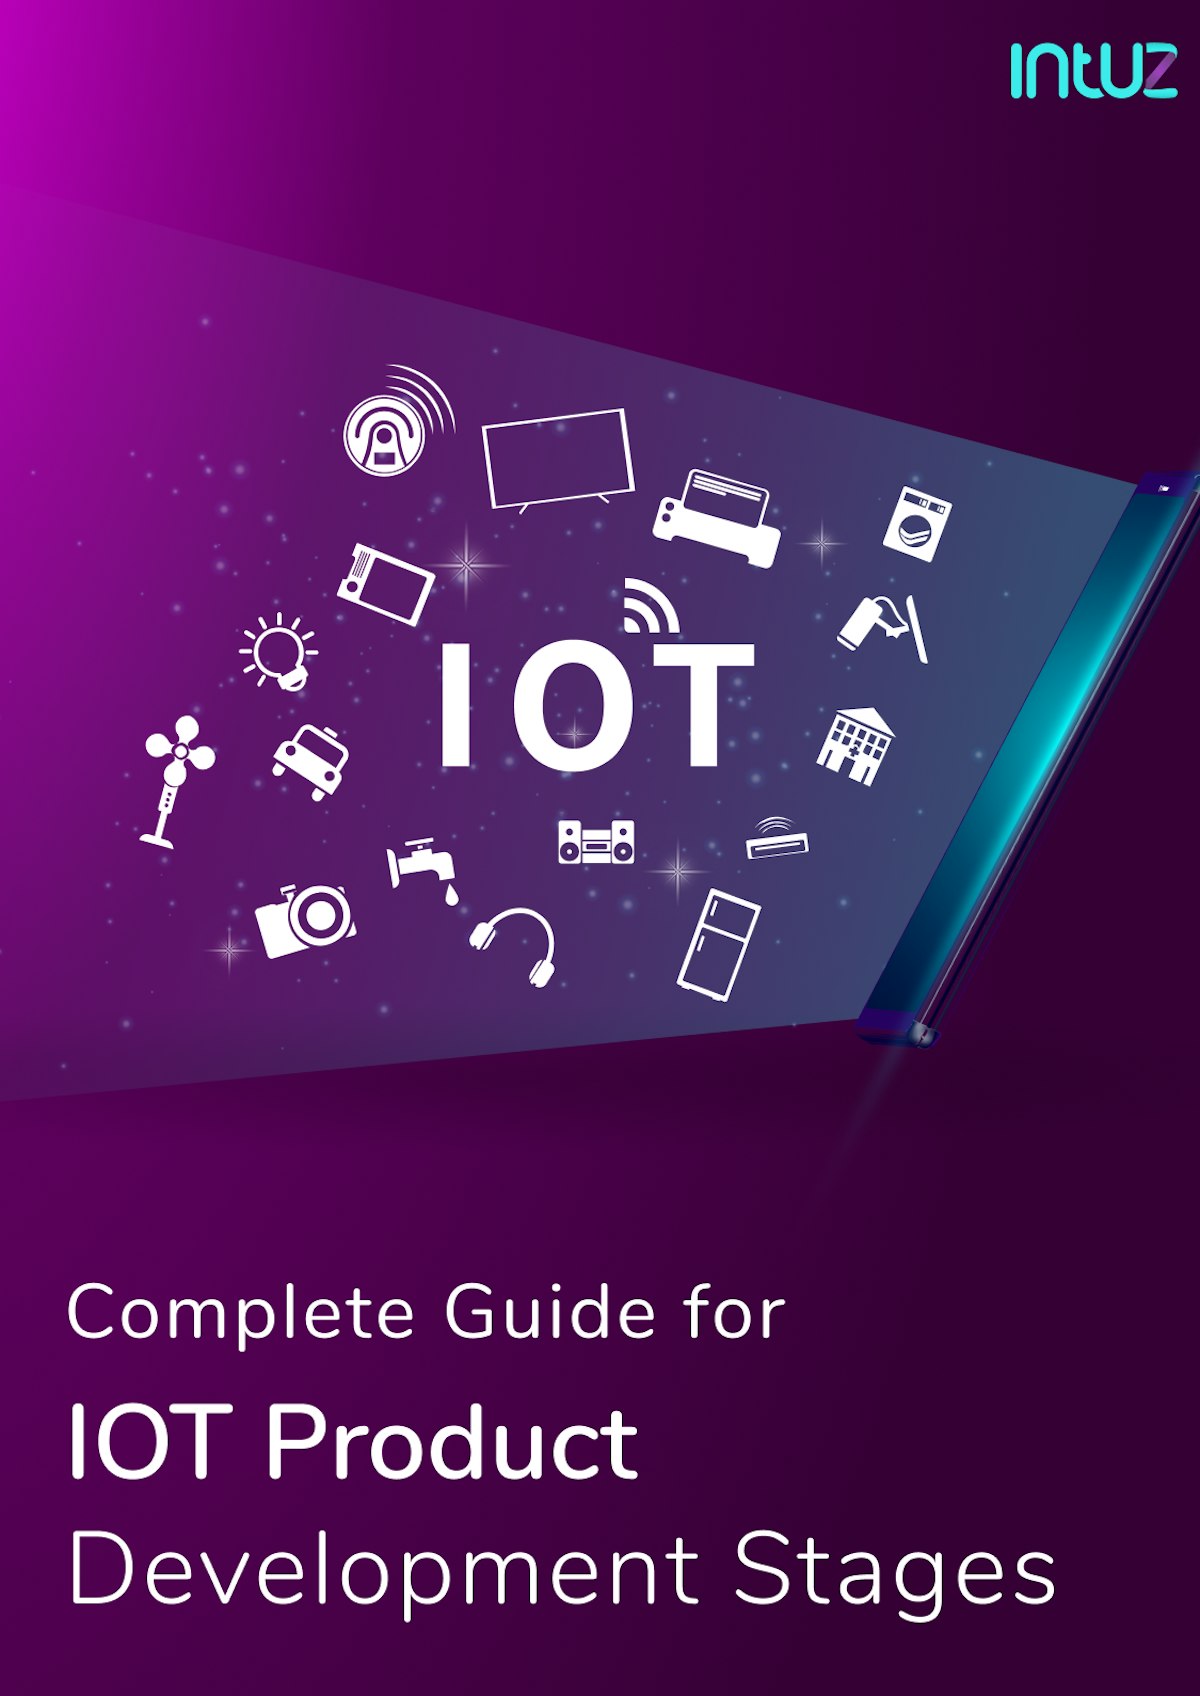 IoT Product Development Stages - Guide 